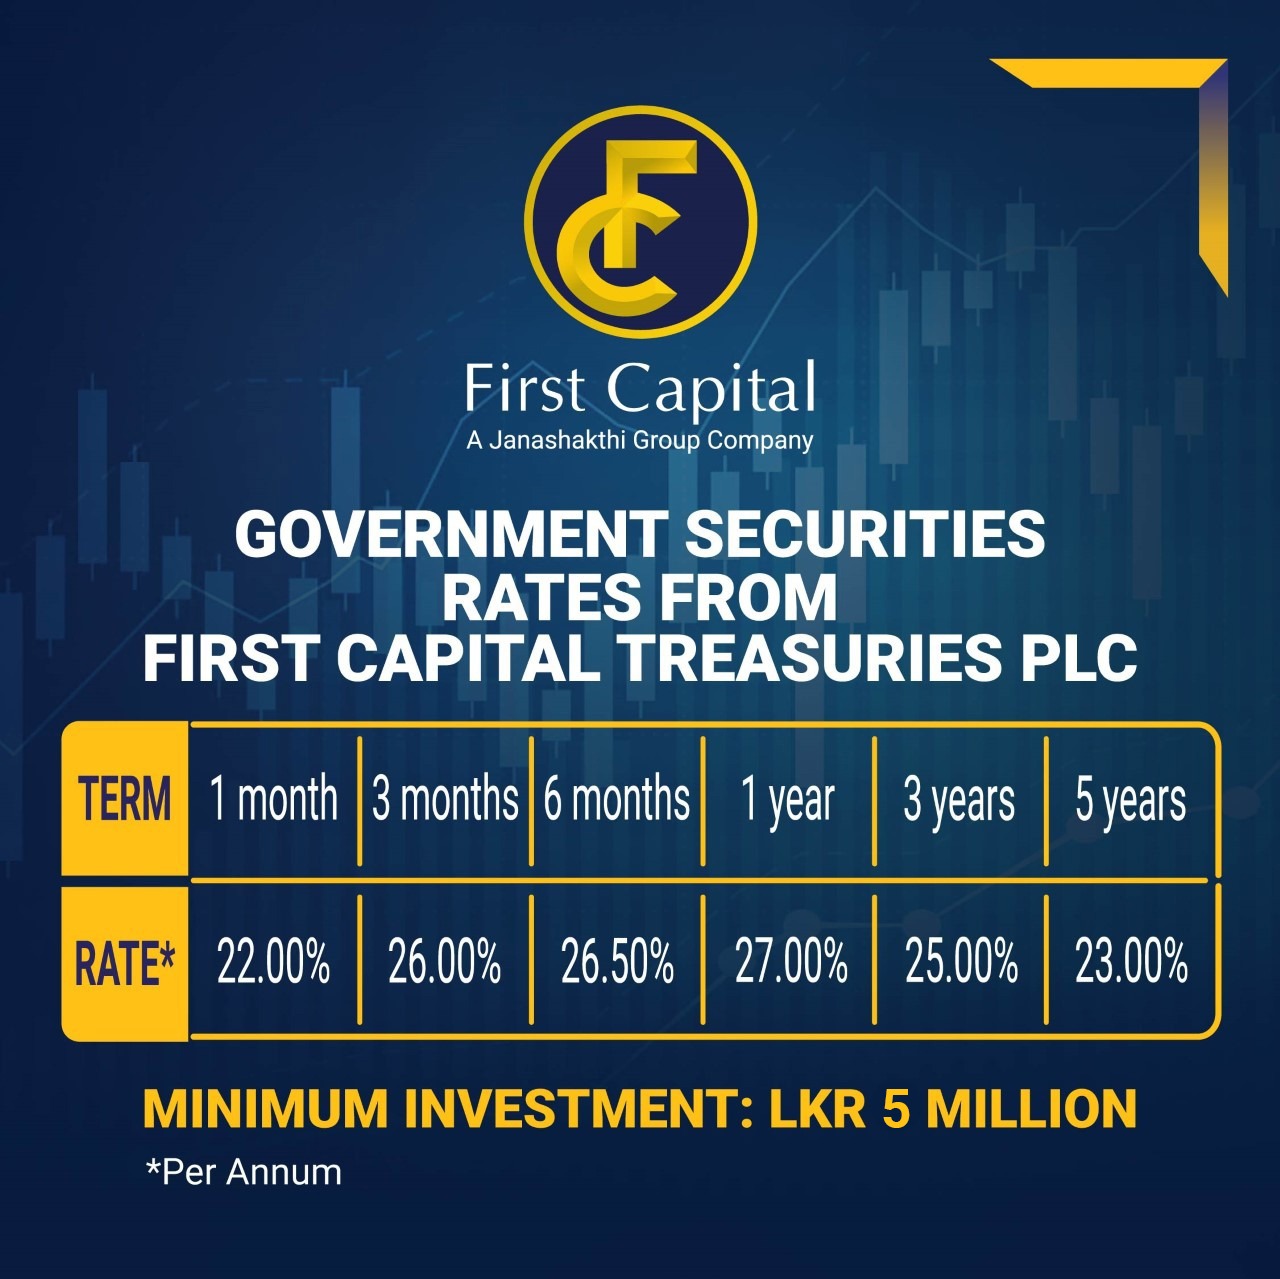 Government Securities Rates from First Capital Treasuries PLC 27 July 22